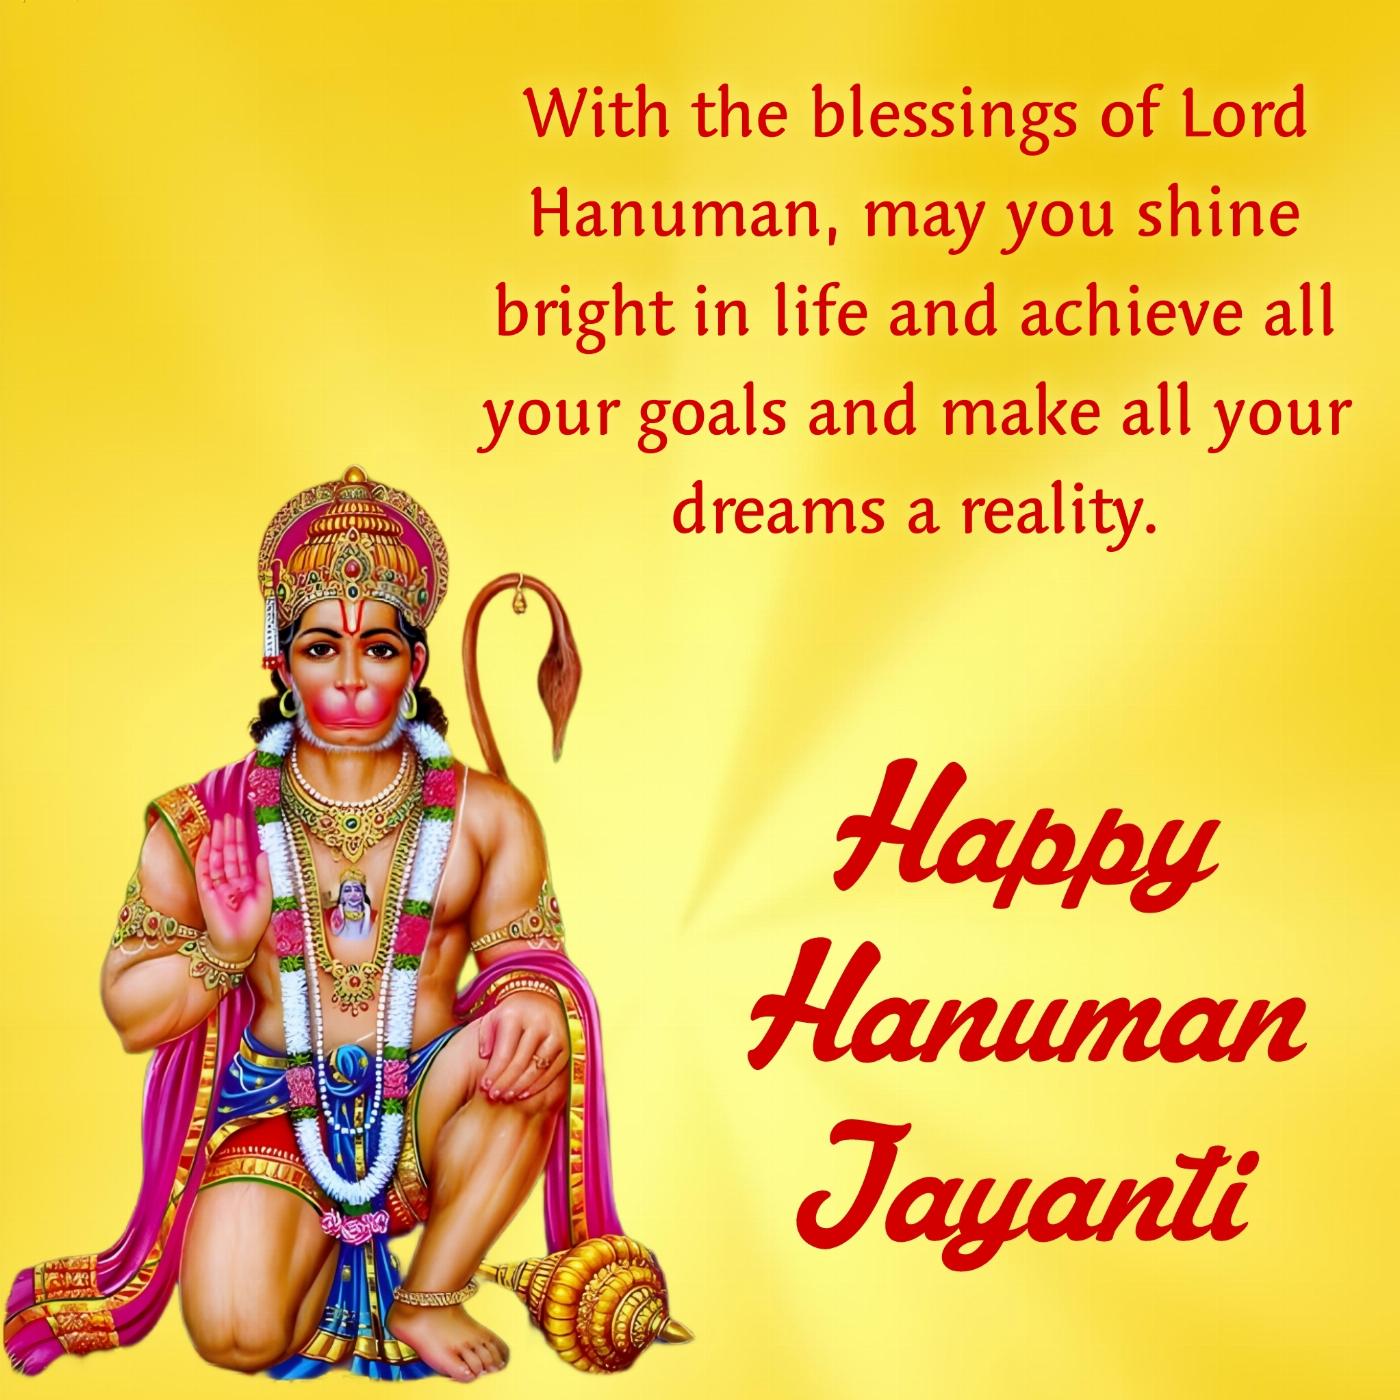 With the blessings of Lord Hanuman may you shine bright